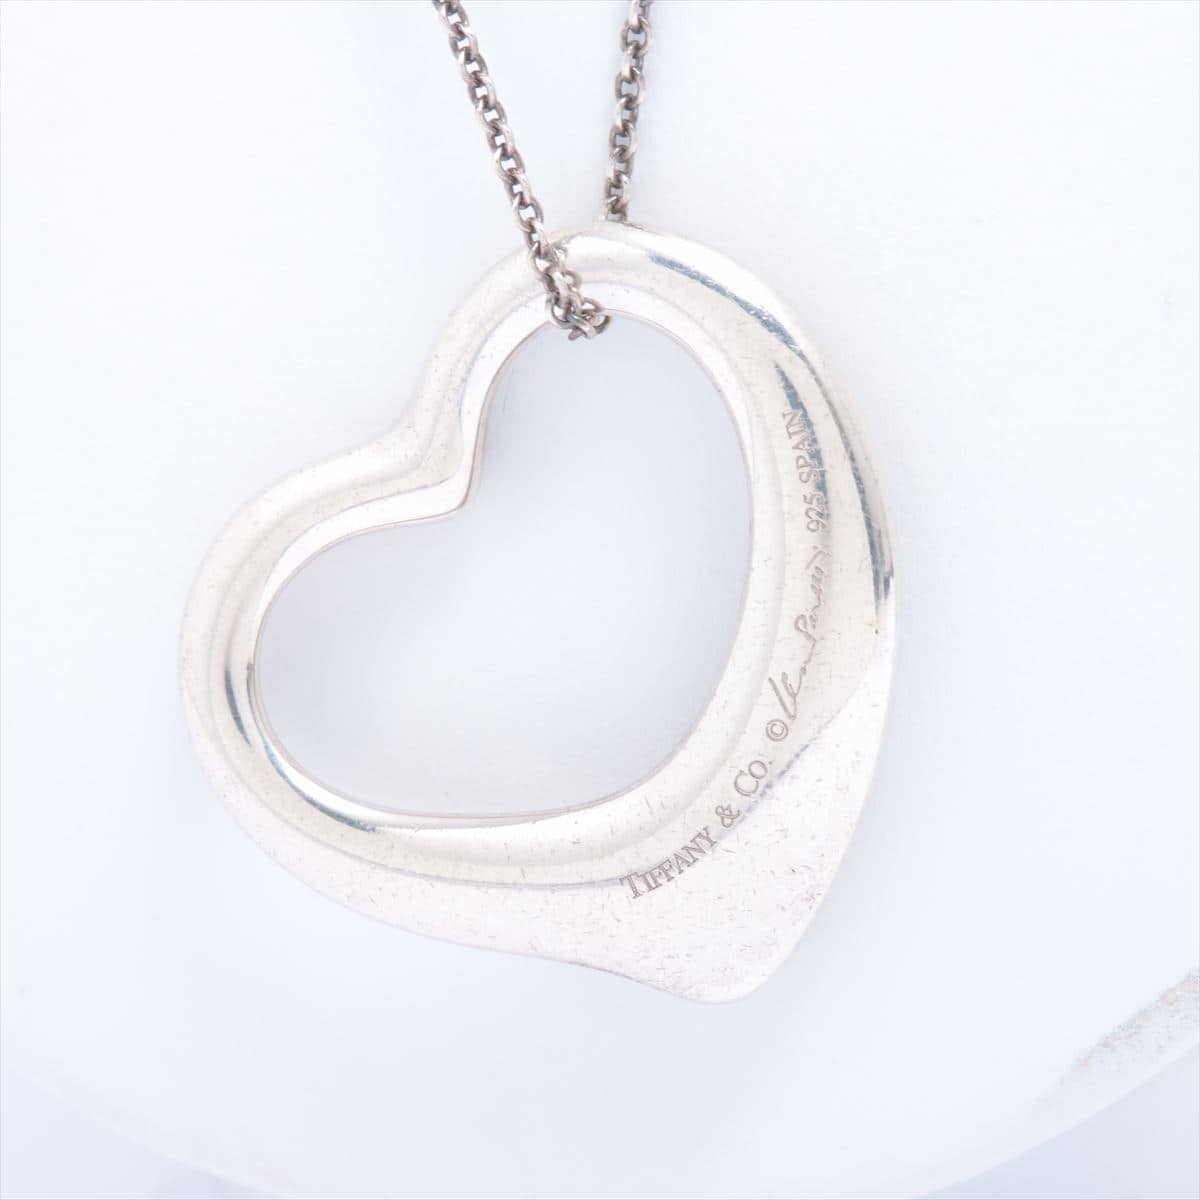 Tiffany Open Heart Necklace 925 20.8g Silver